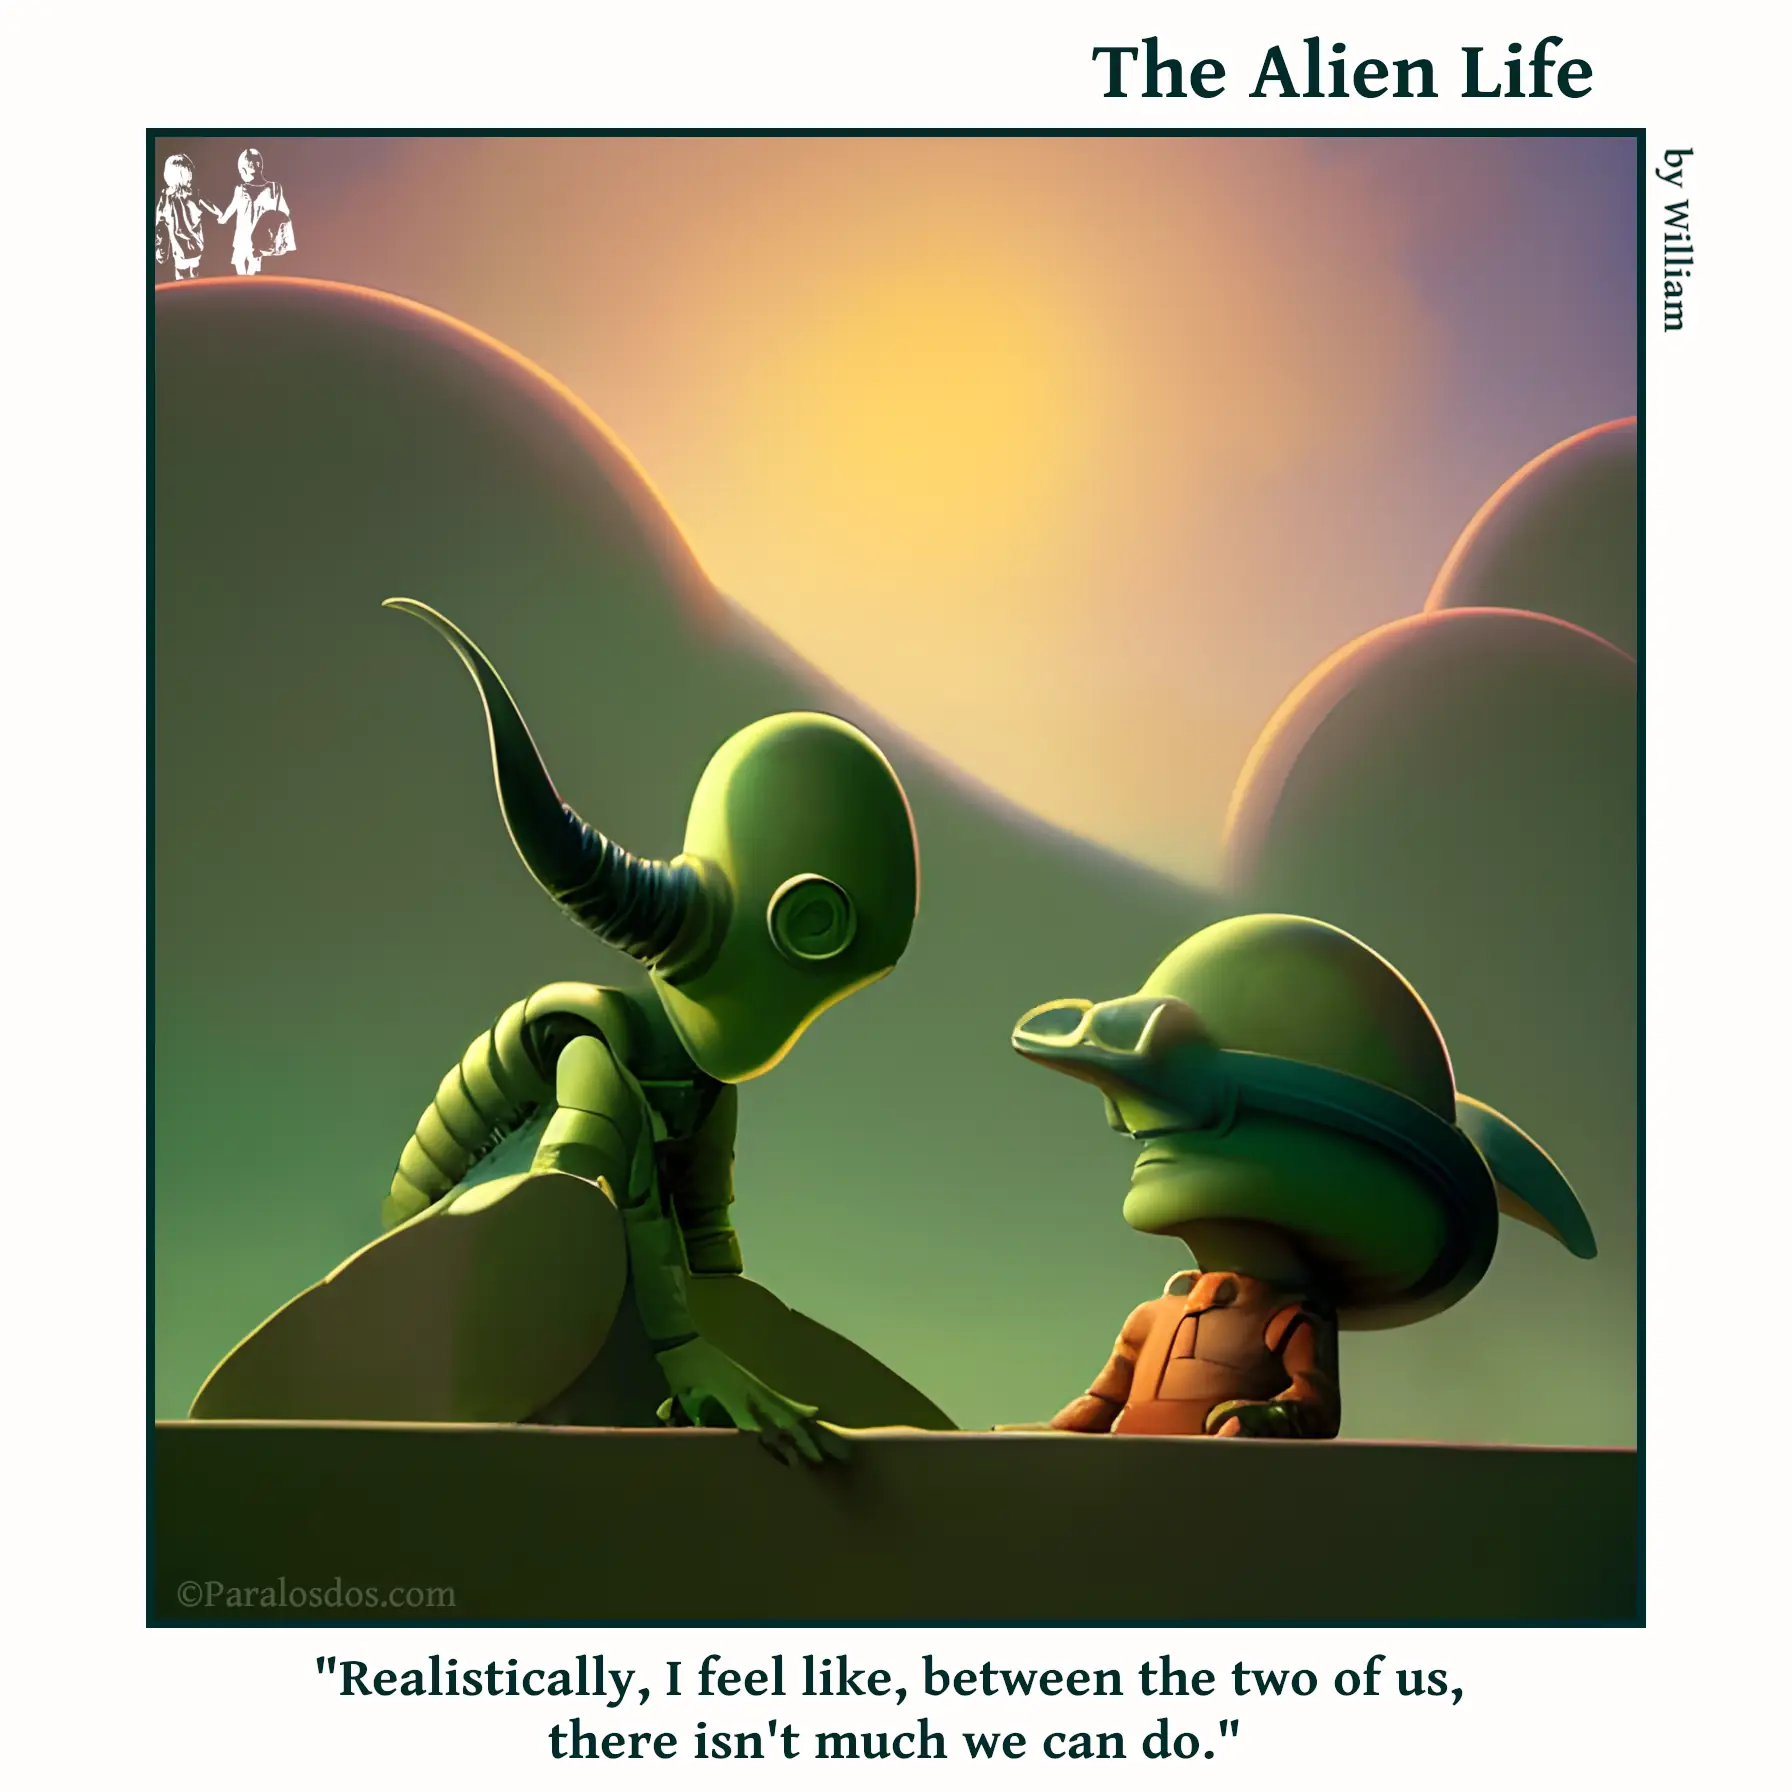 The Alien Life, one panel Comic. Two odd looking aliens are hanging out. They look incapable of achieving anything. The caption reads: "Realistically, I feel like, between the two of us, there isn't much we can do."